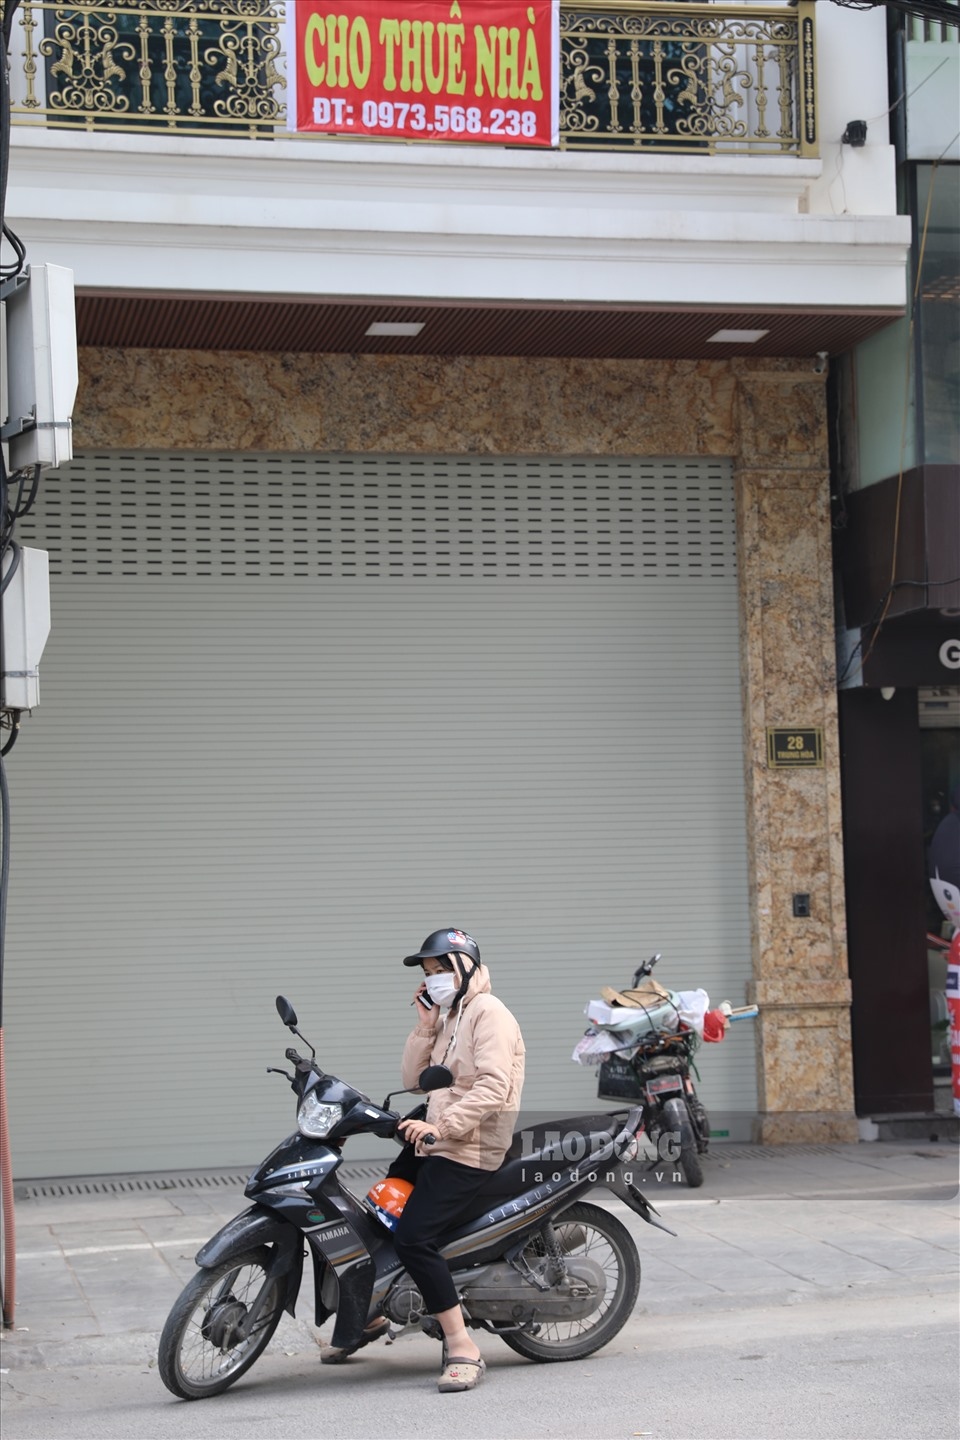 food outlets in hanoi hit by increase in covid-19 infections picture 7